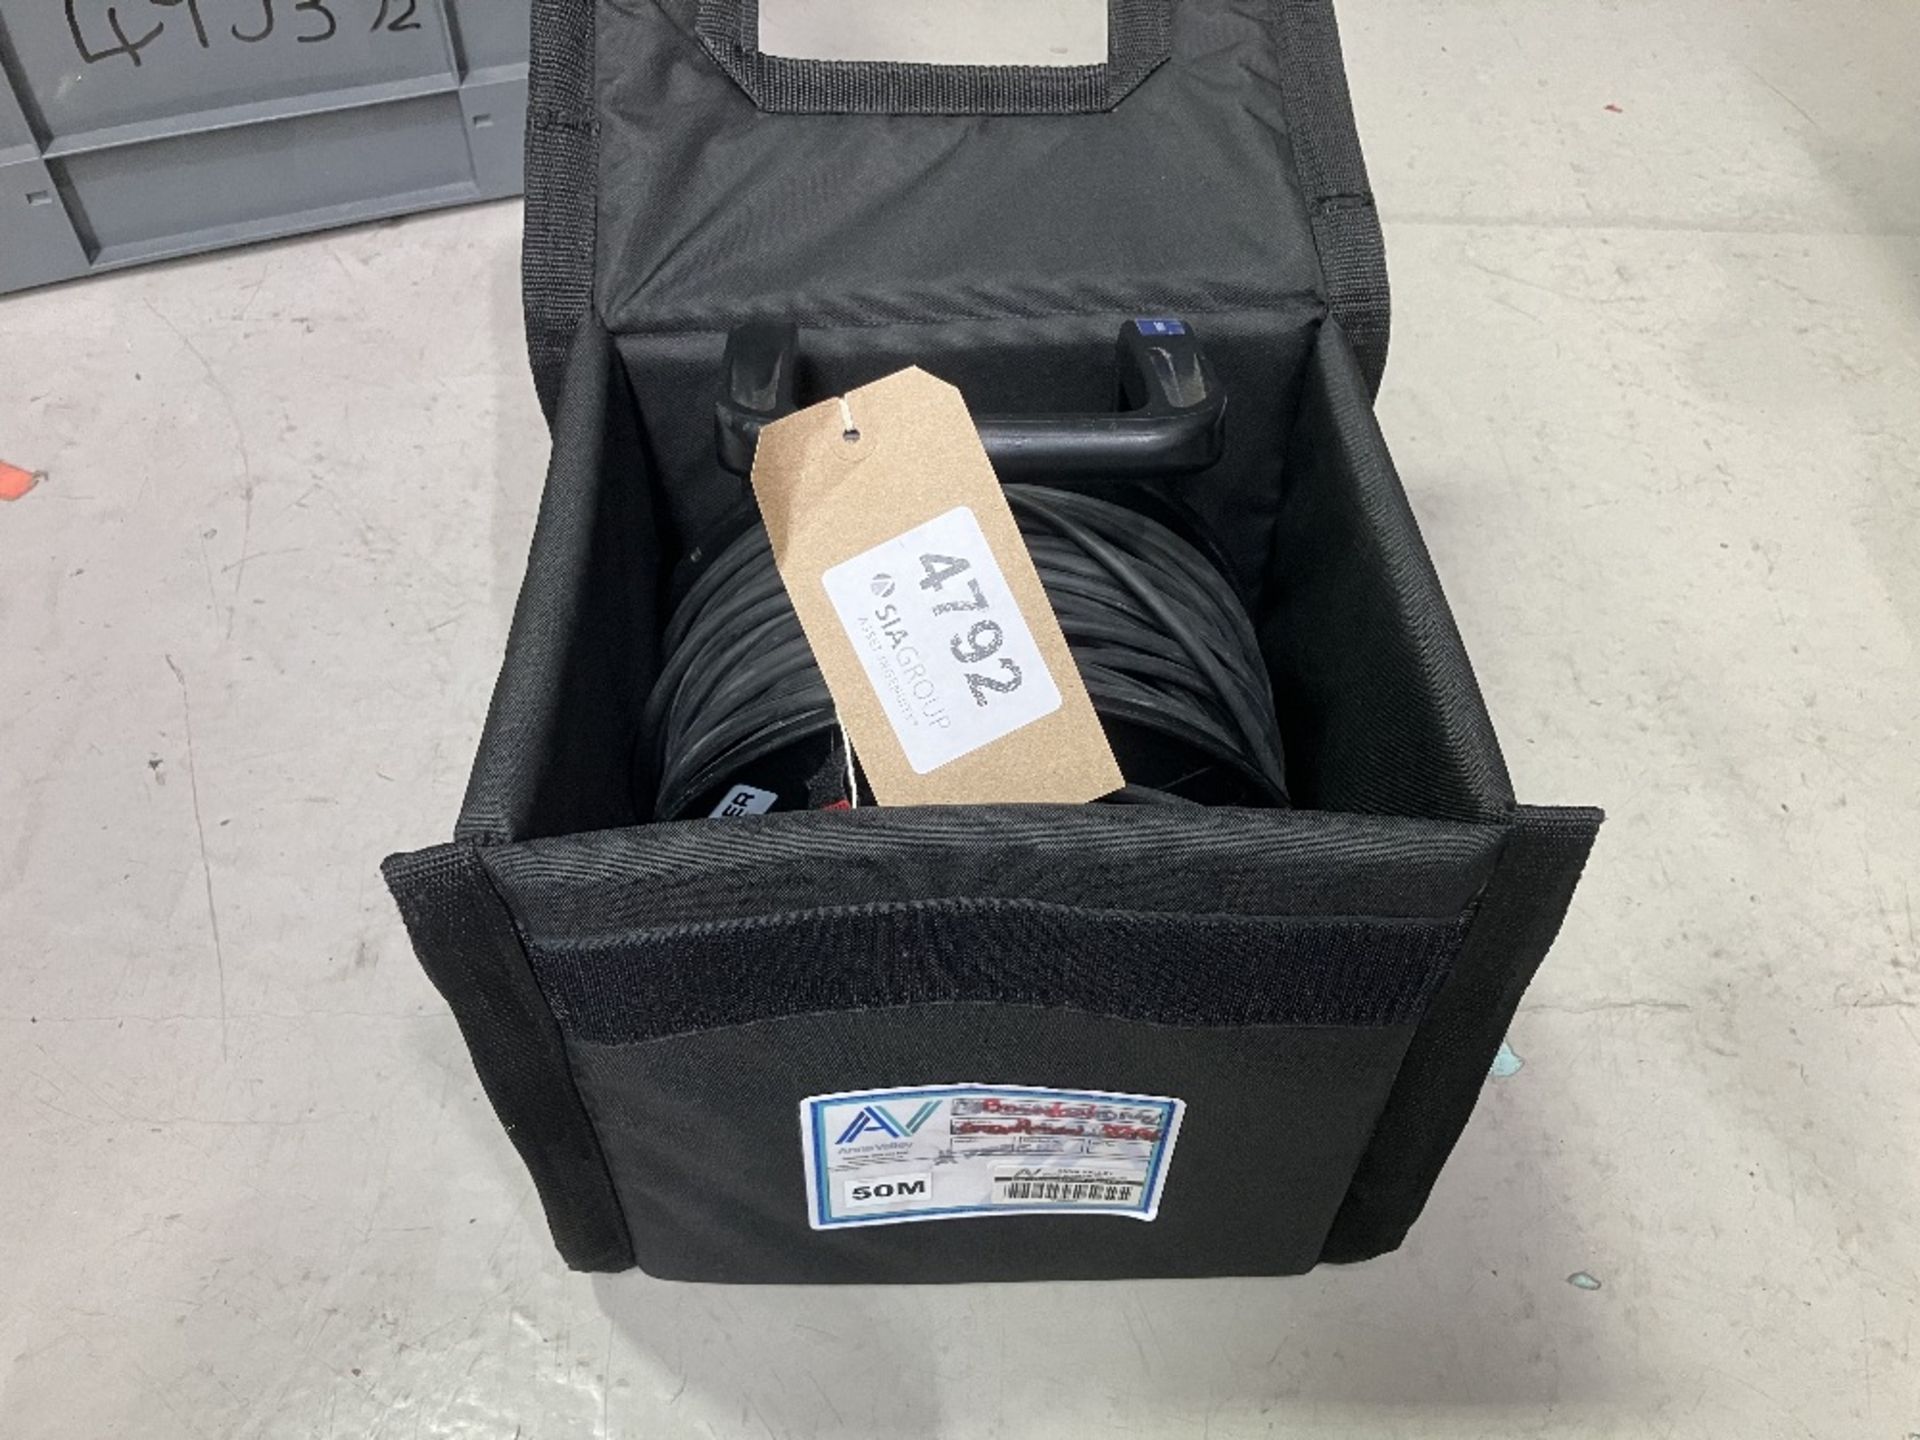 50m Rigid HDMI Fibre Cable Reel With Carry Bag - Image 2 of 6